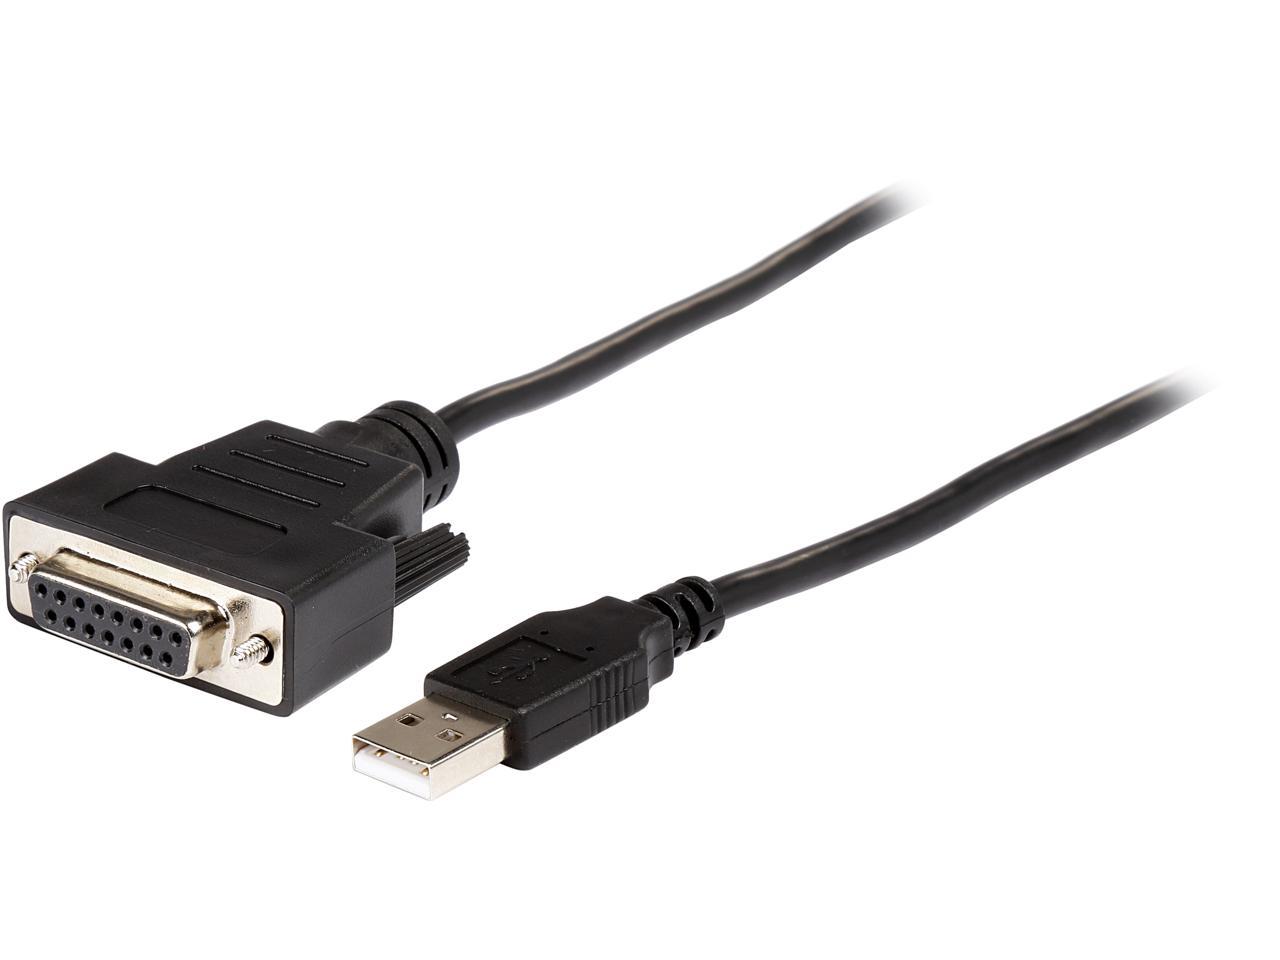 to 9 Pin USB Type A V7 V7U3.0EXT-2M-BLK-1N USB Extension Cable 6 9 Pin USB Type A M F Black 